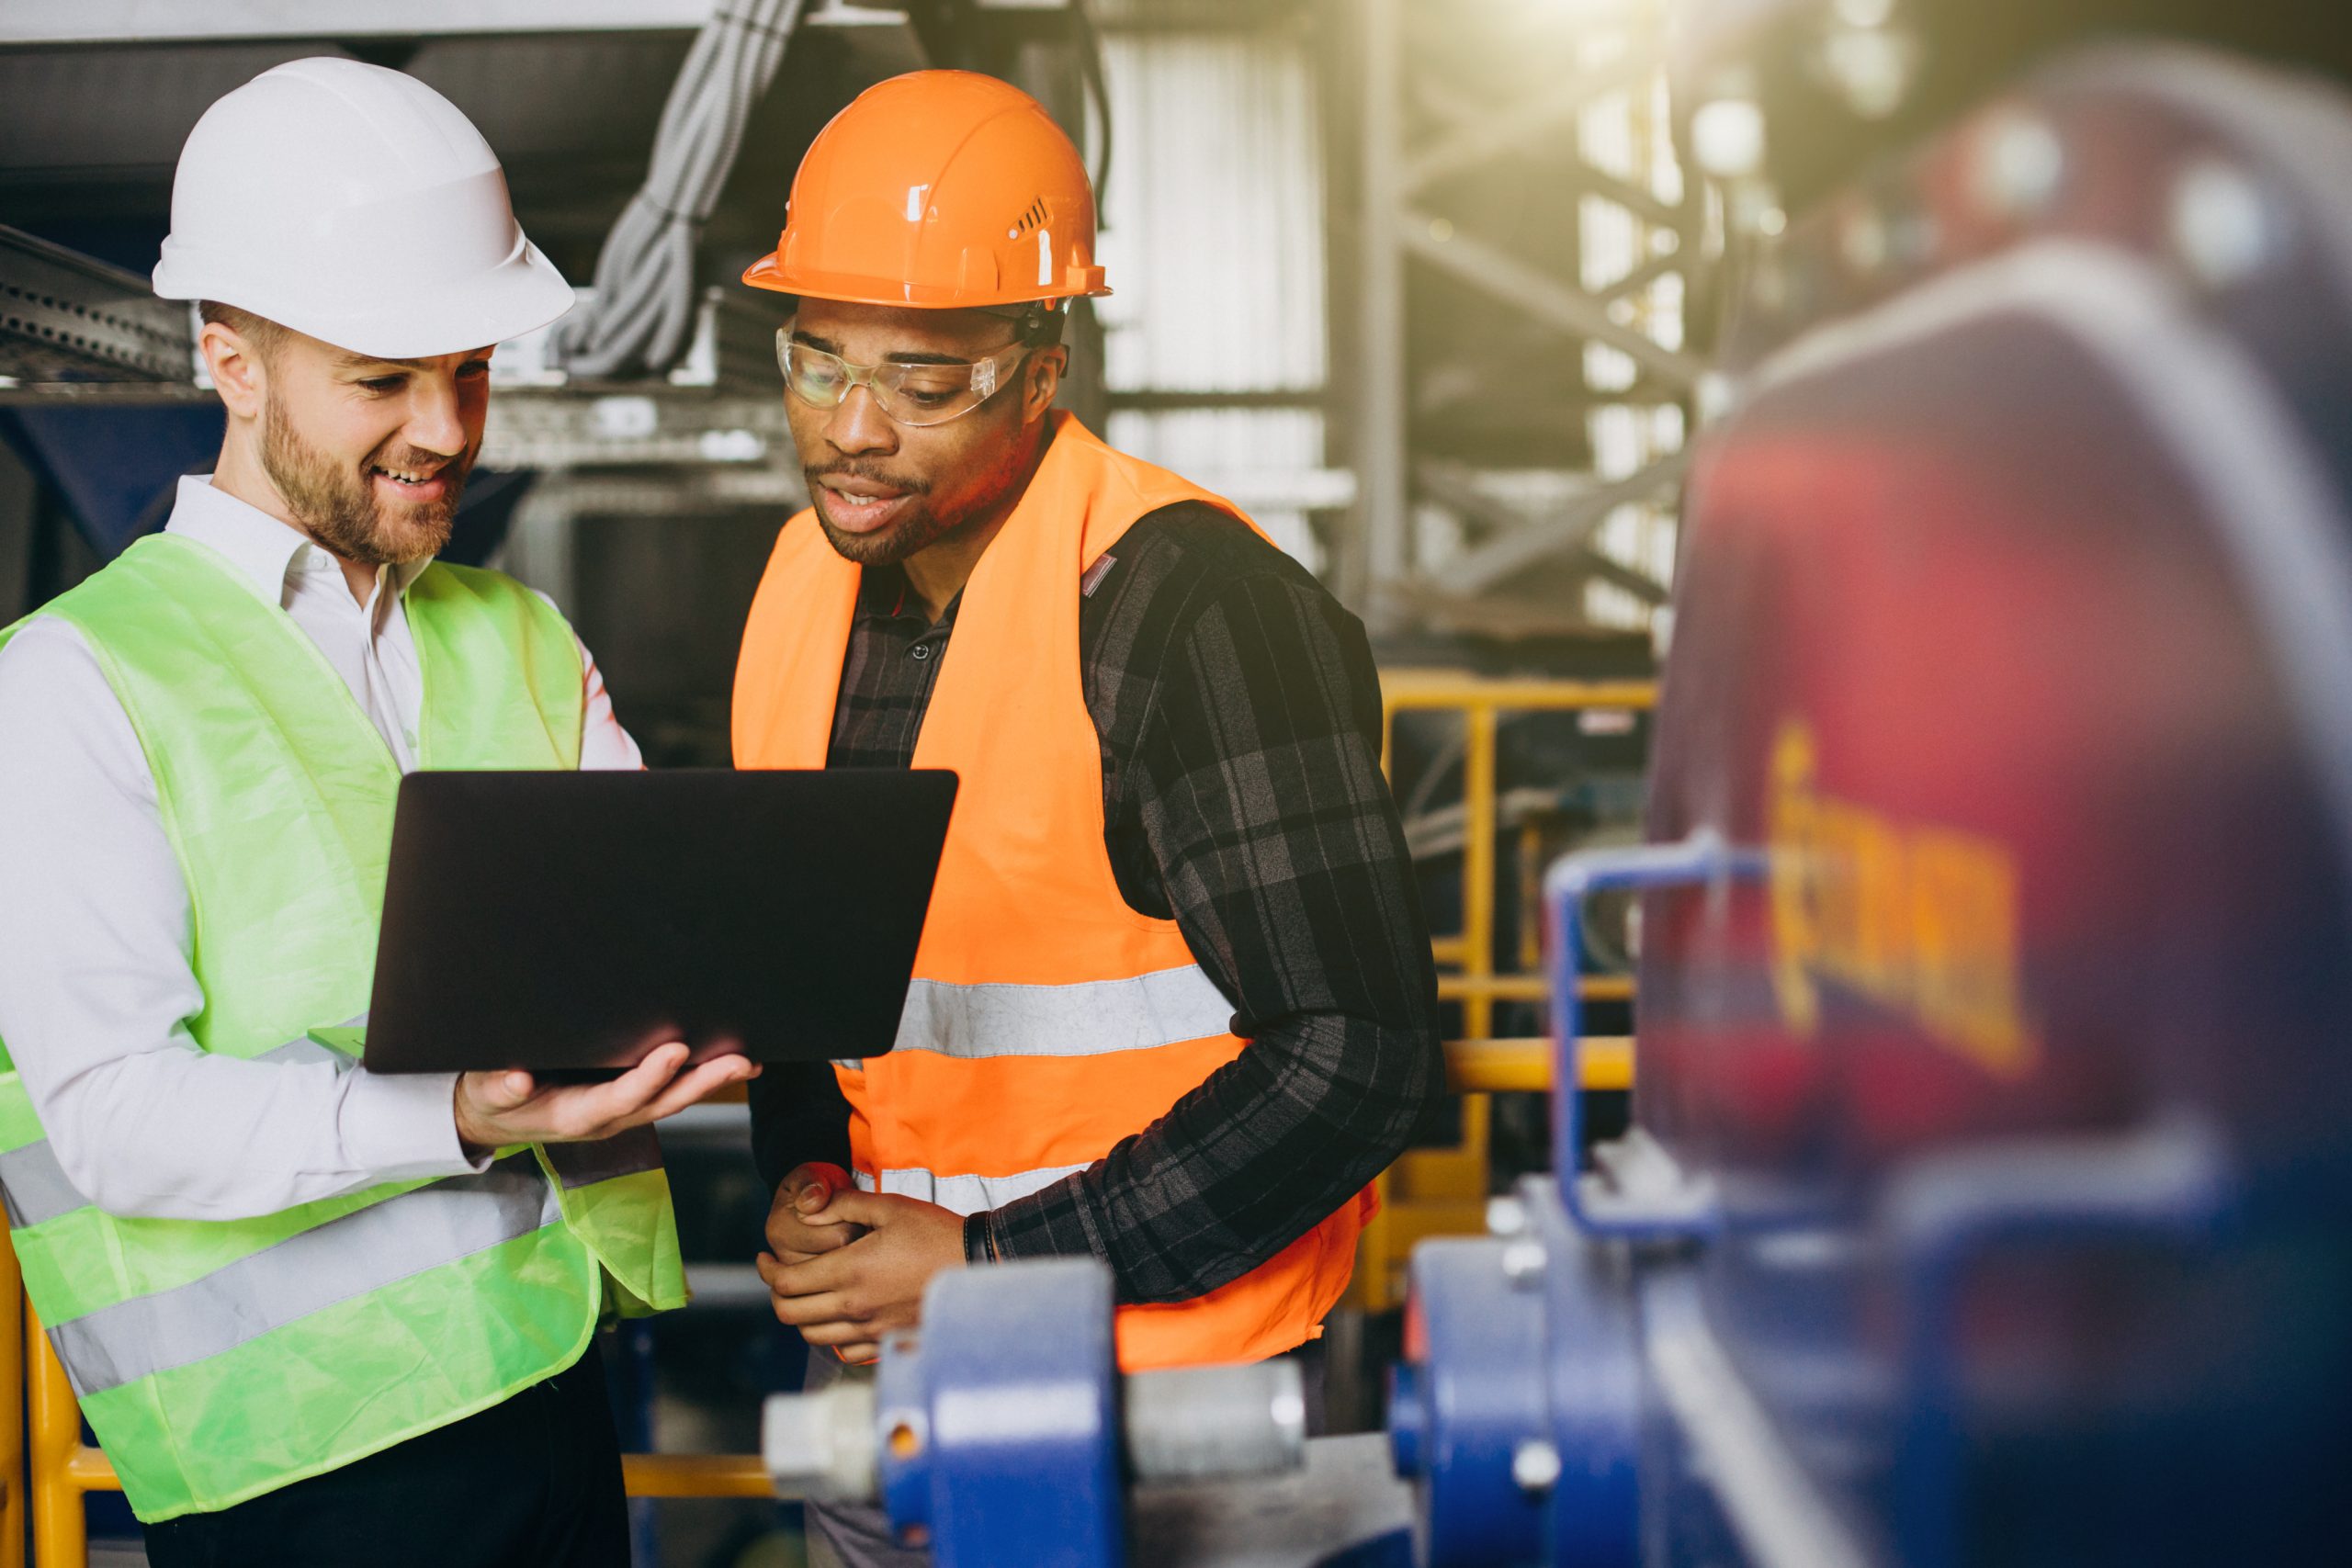 Rugged devices used on-site can be managed with UEMs